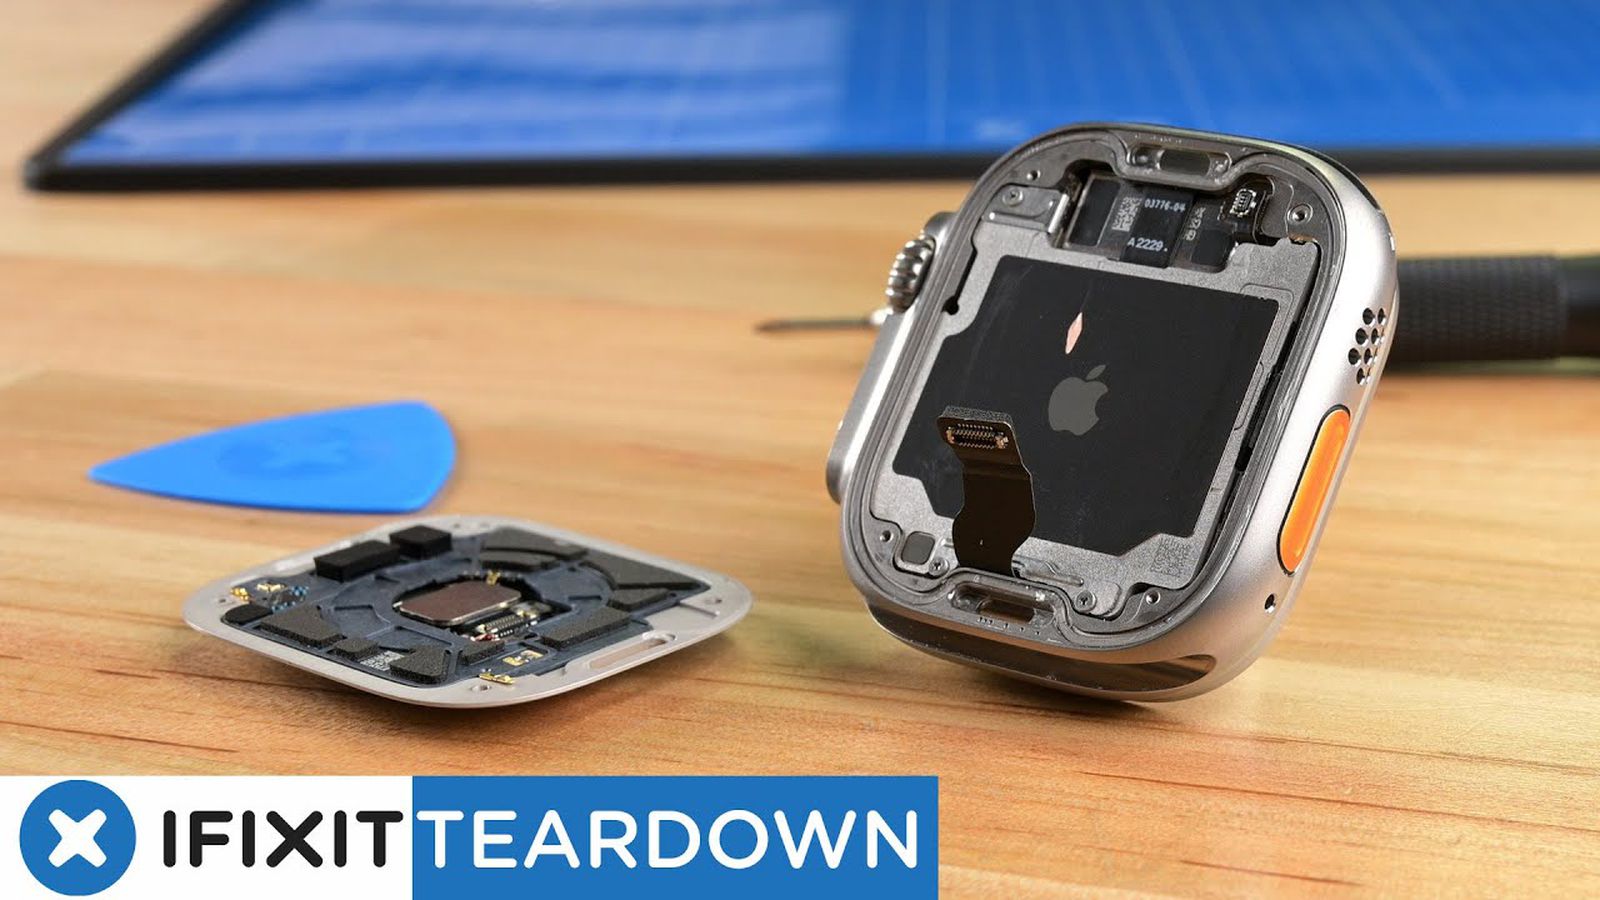 Apple Watch Ultra Teardown Reveals Larger Battery, Improved Water  Resistance, and More - MacRumors